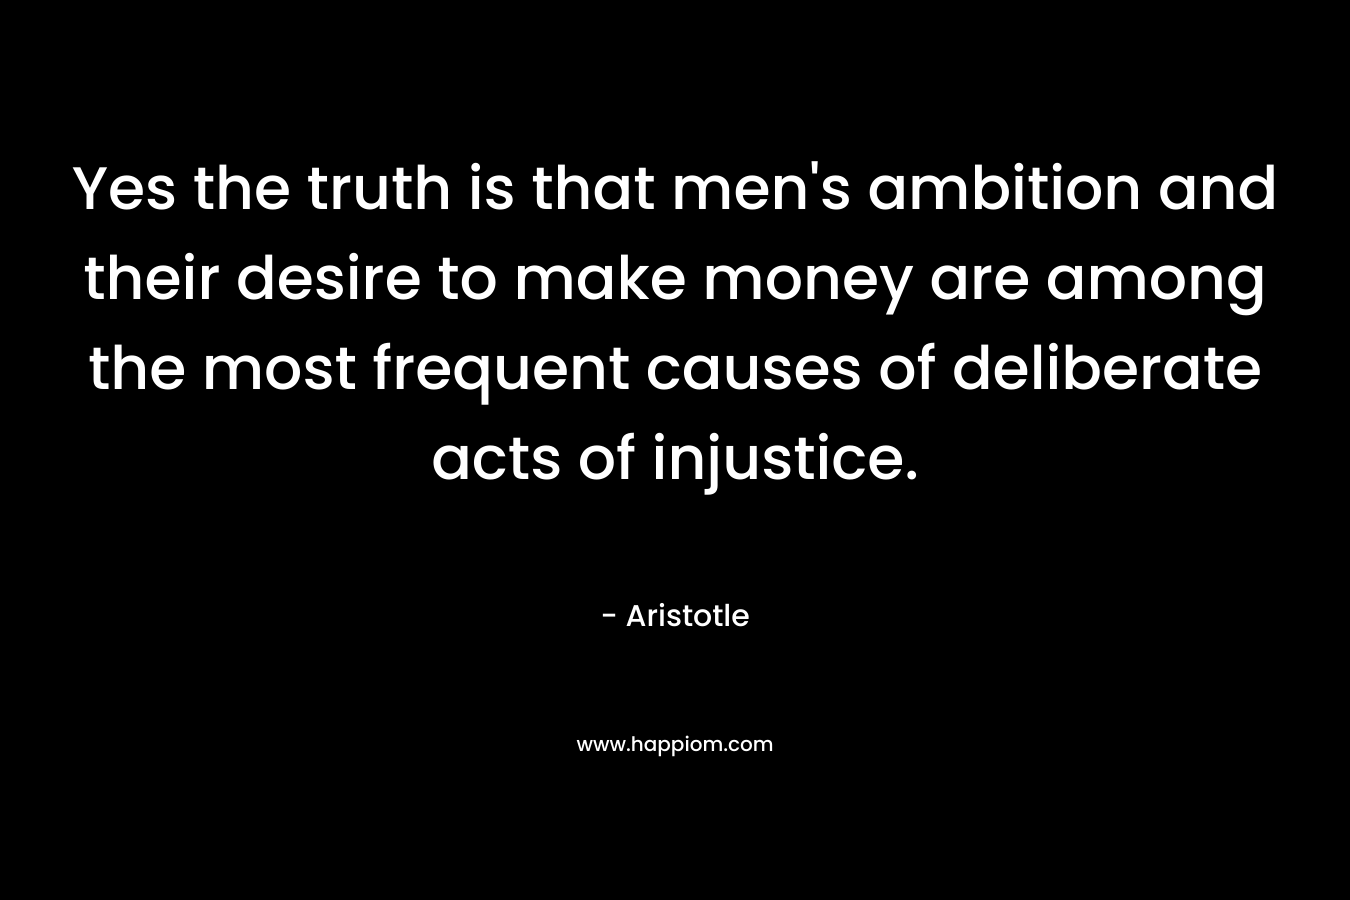 Yes the truth is that men’s ambition and their desire to make money are among the most frequent causes of deliberate acts of injustice. – Aristotle